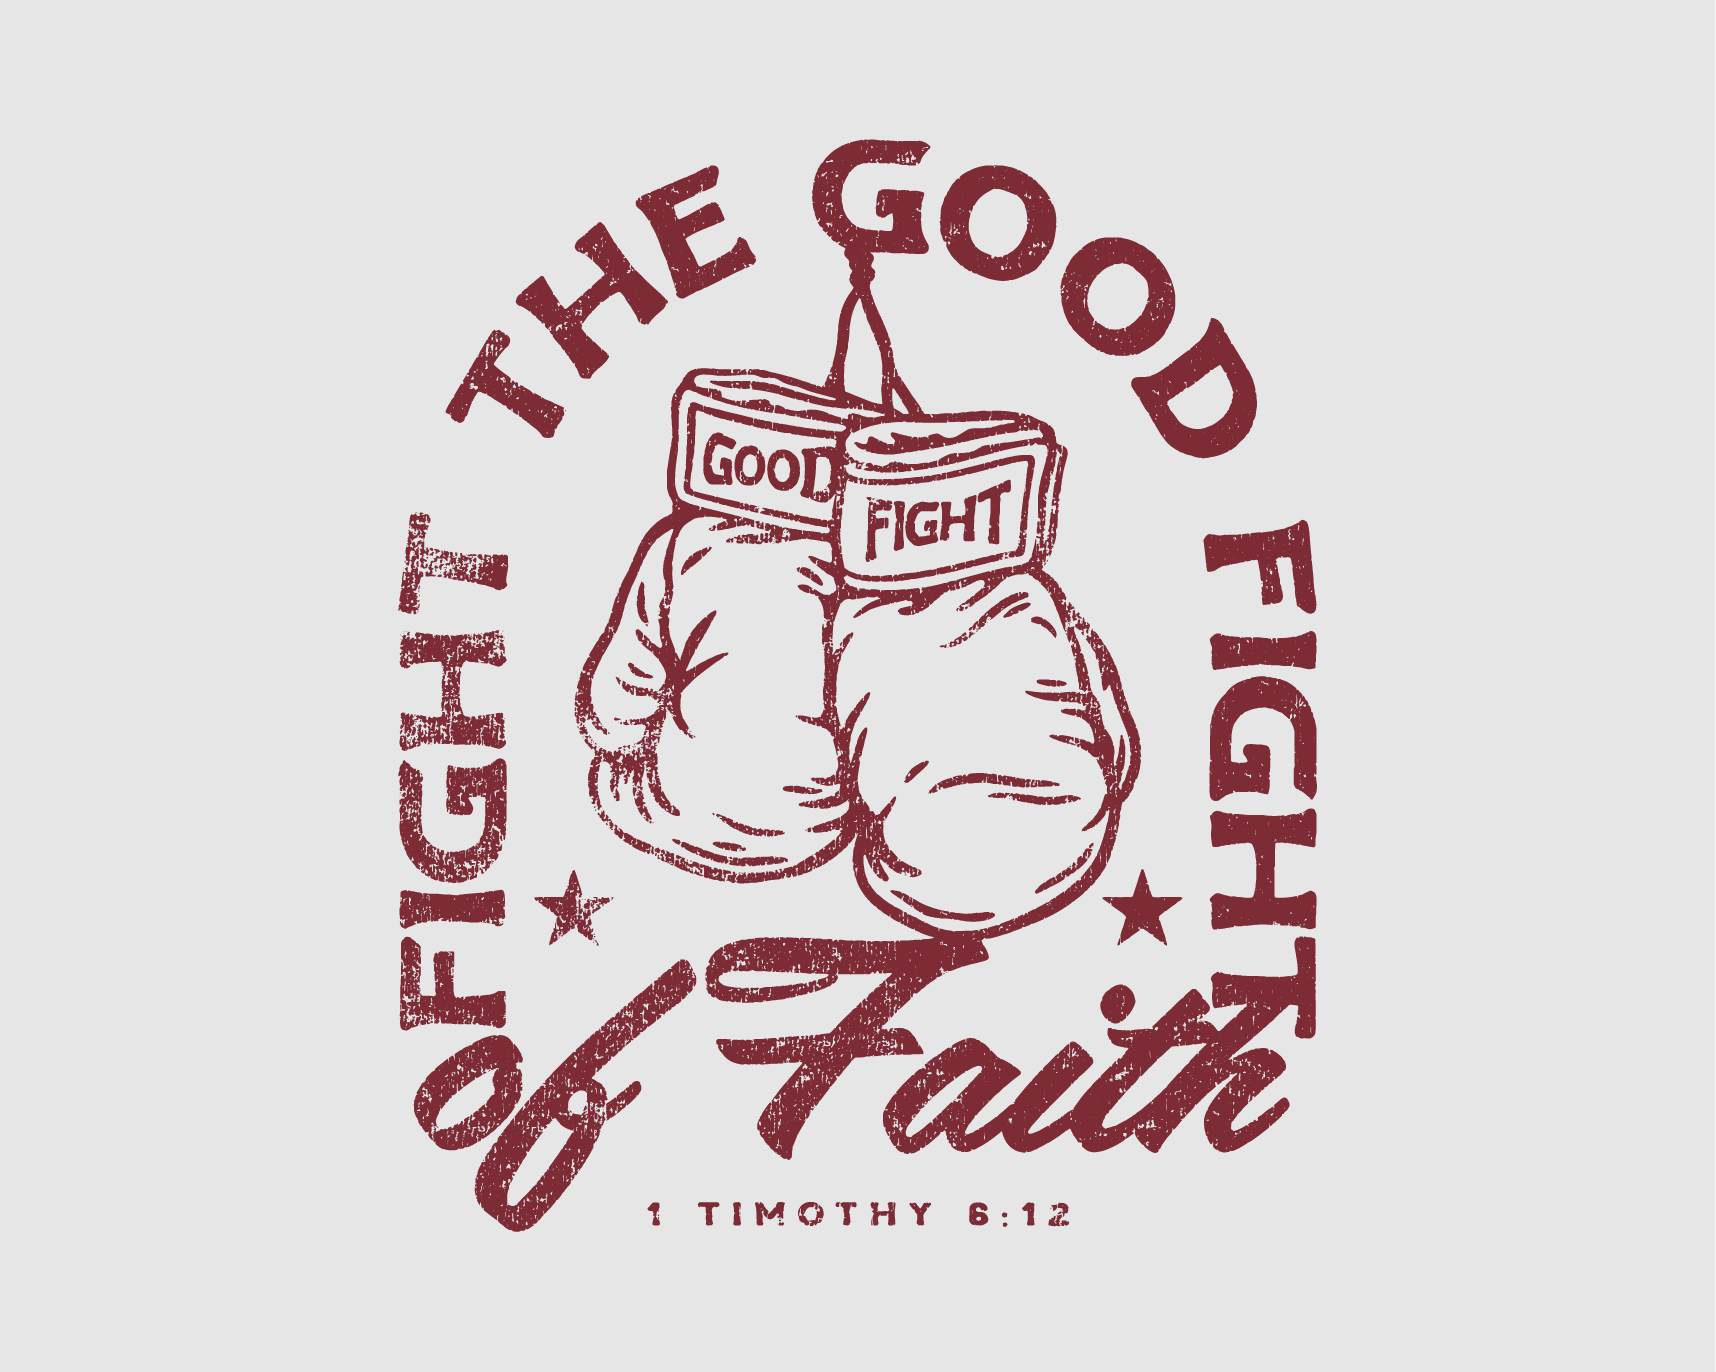 GOOD FIGHT - 1 Timothy 6:12 - Proclamation Coalition